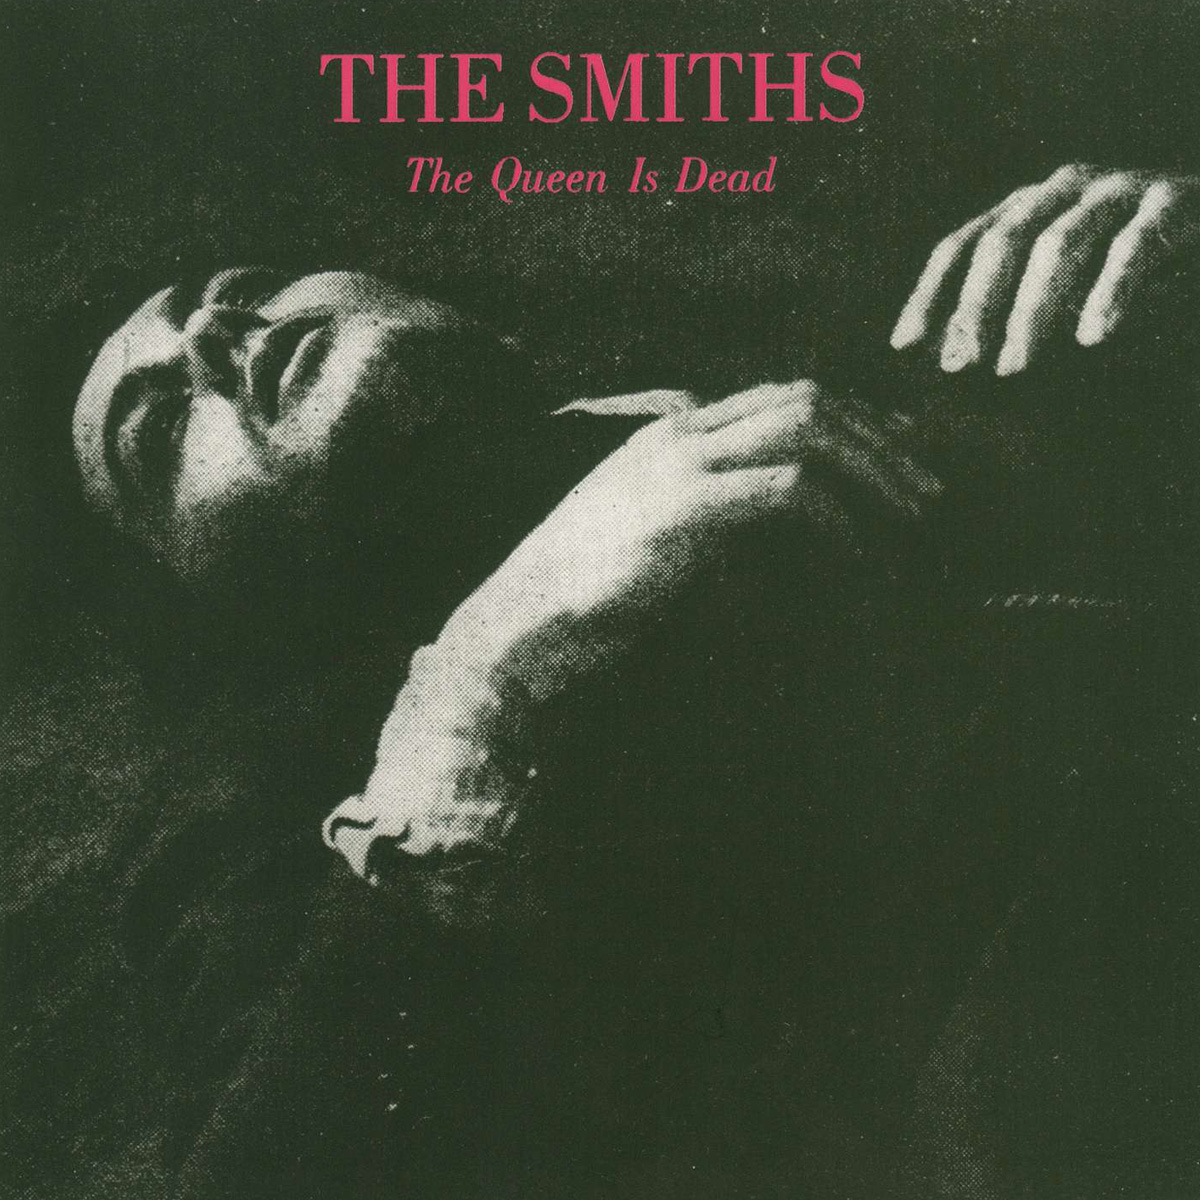 The Queen is Dead Musikalbum - The Smiths